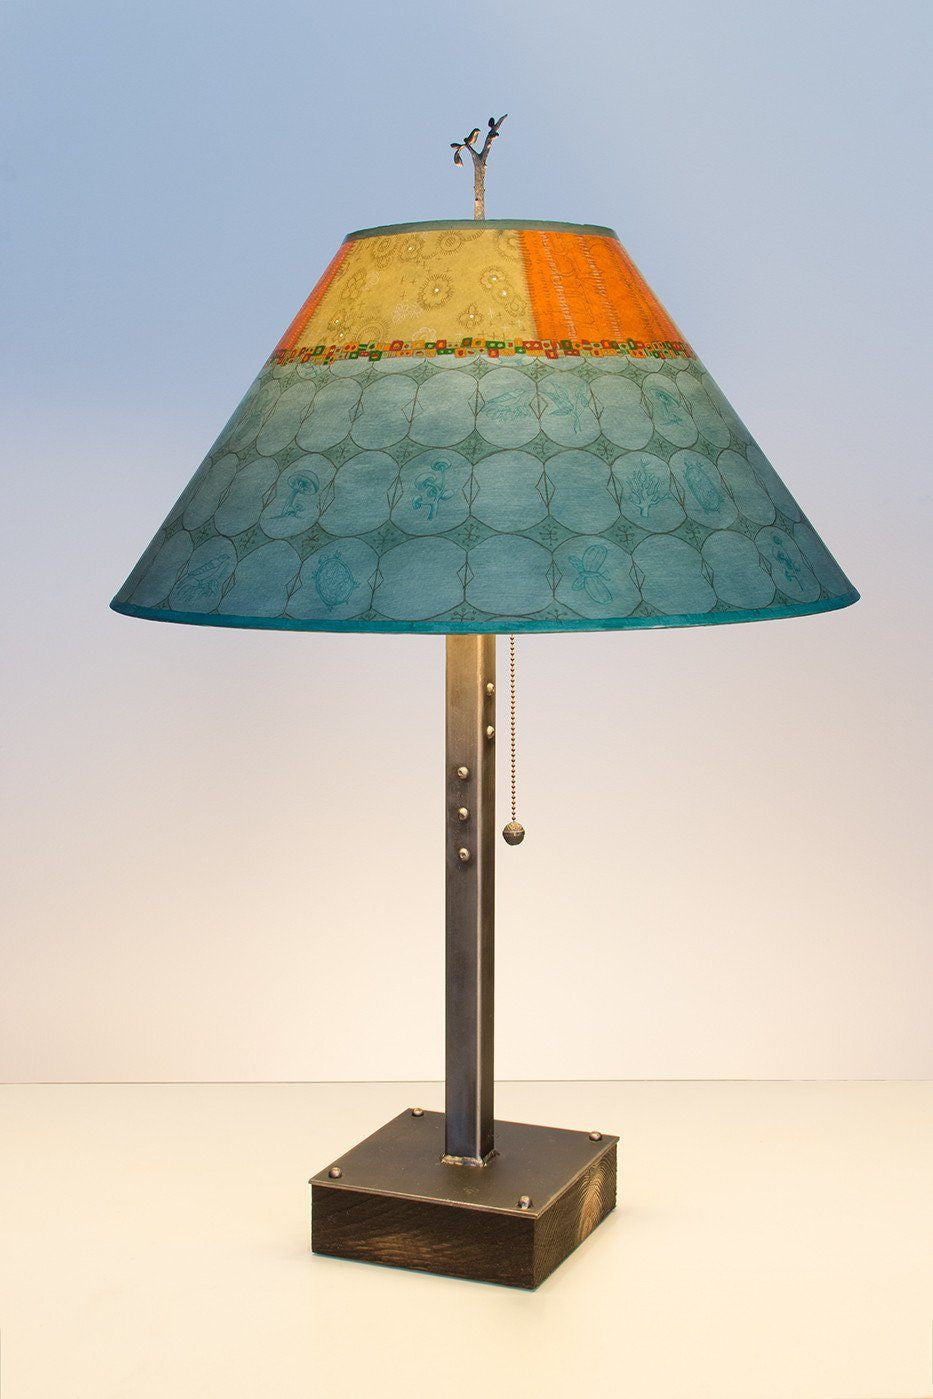 Steel Table Lamp on Wood with Large Conical Shade in Paradise Pool